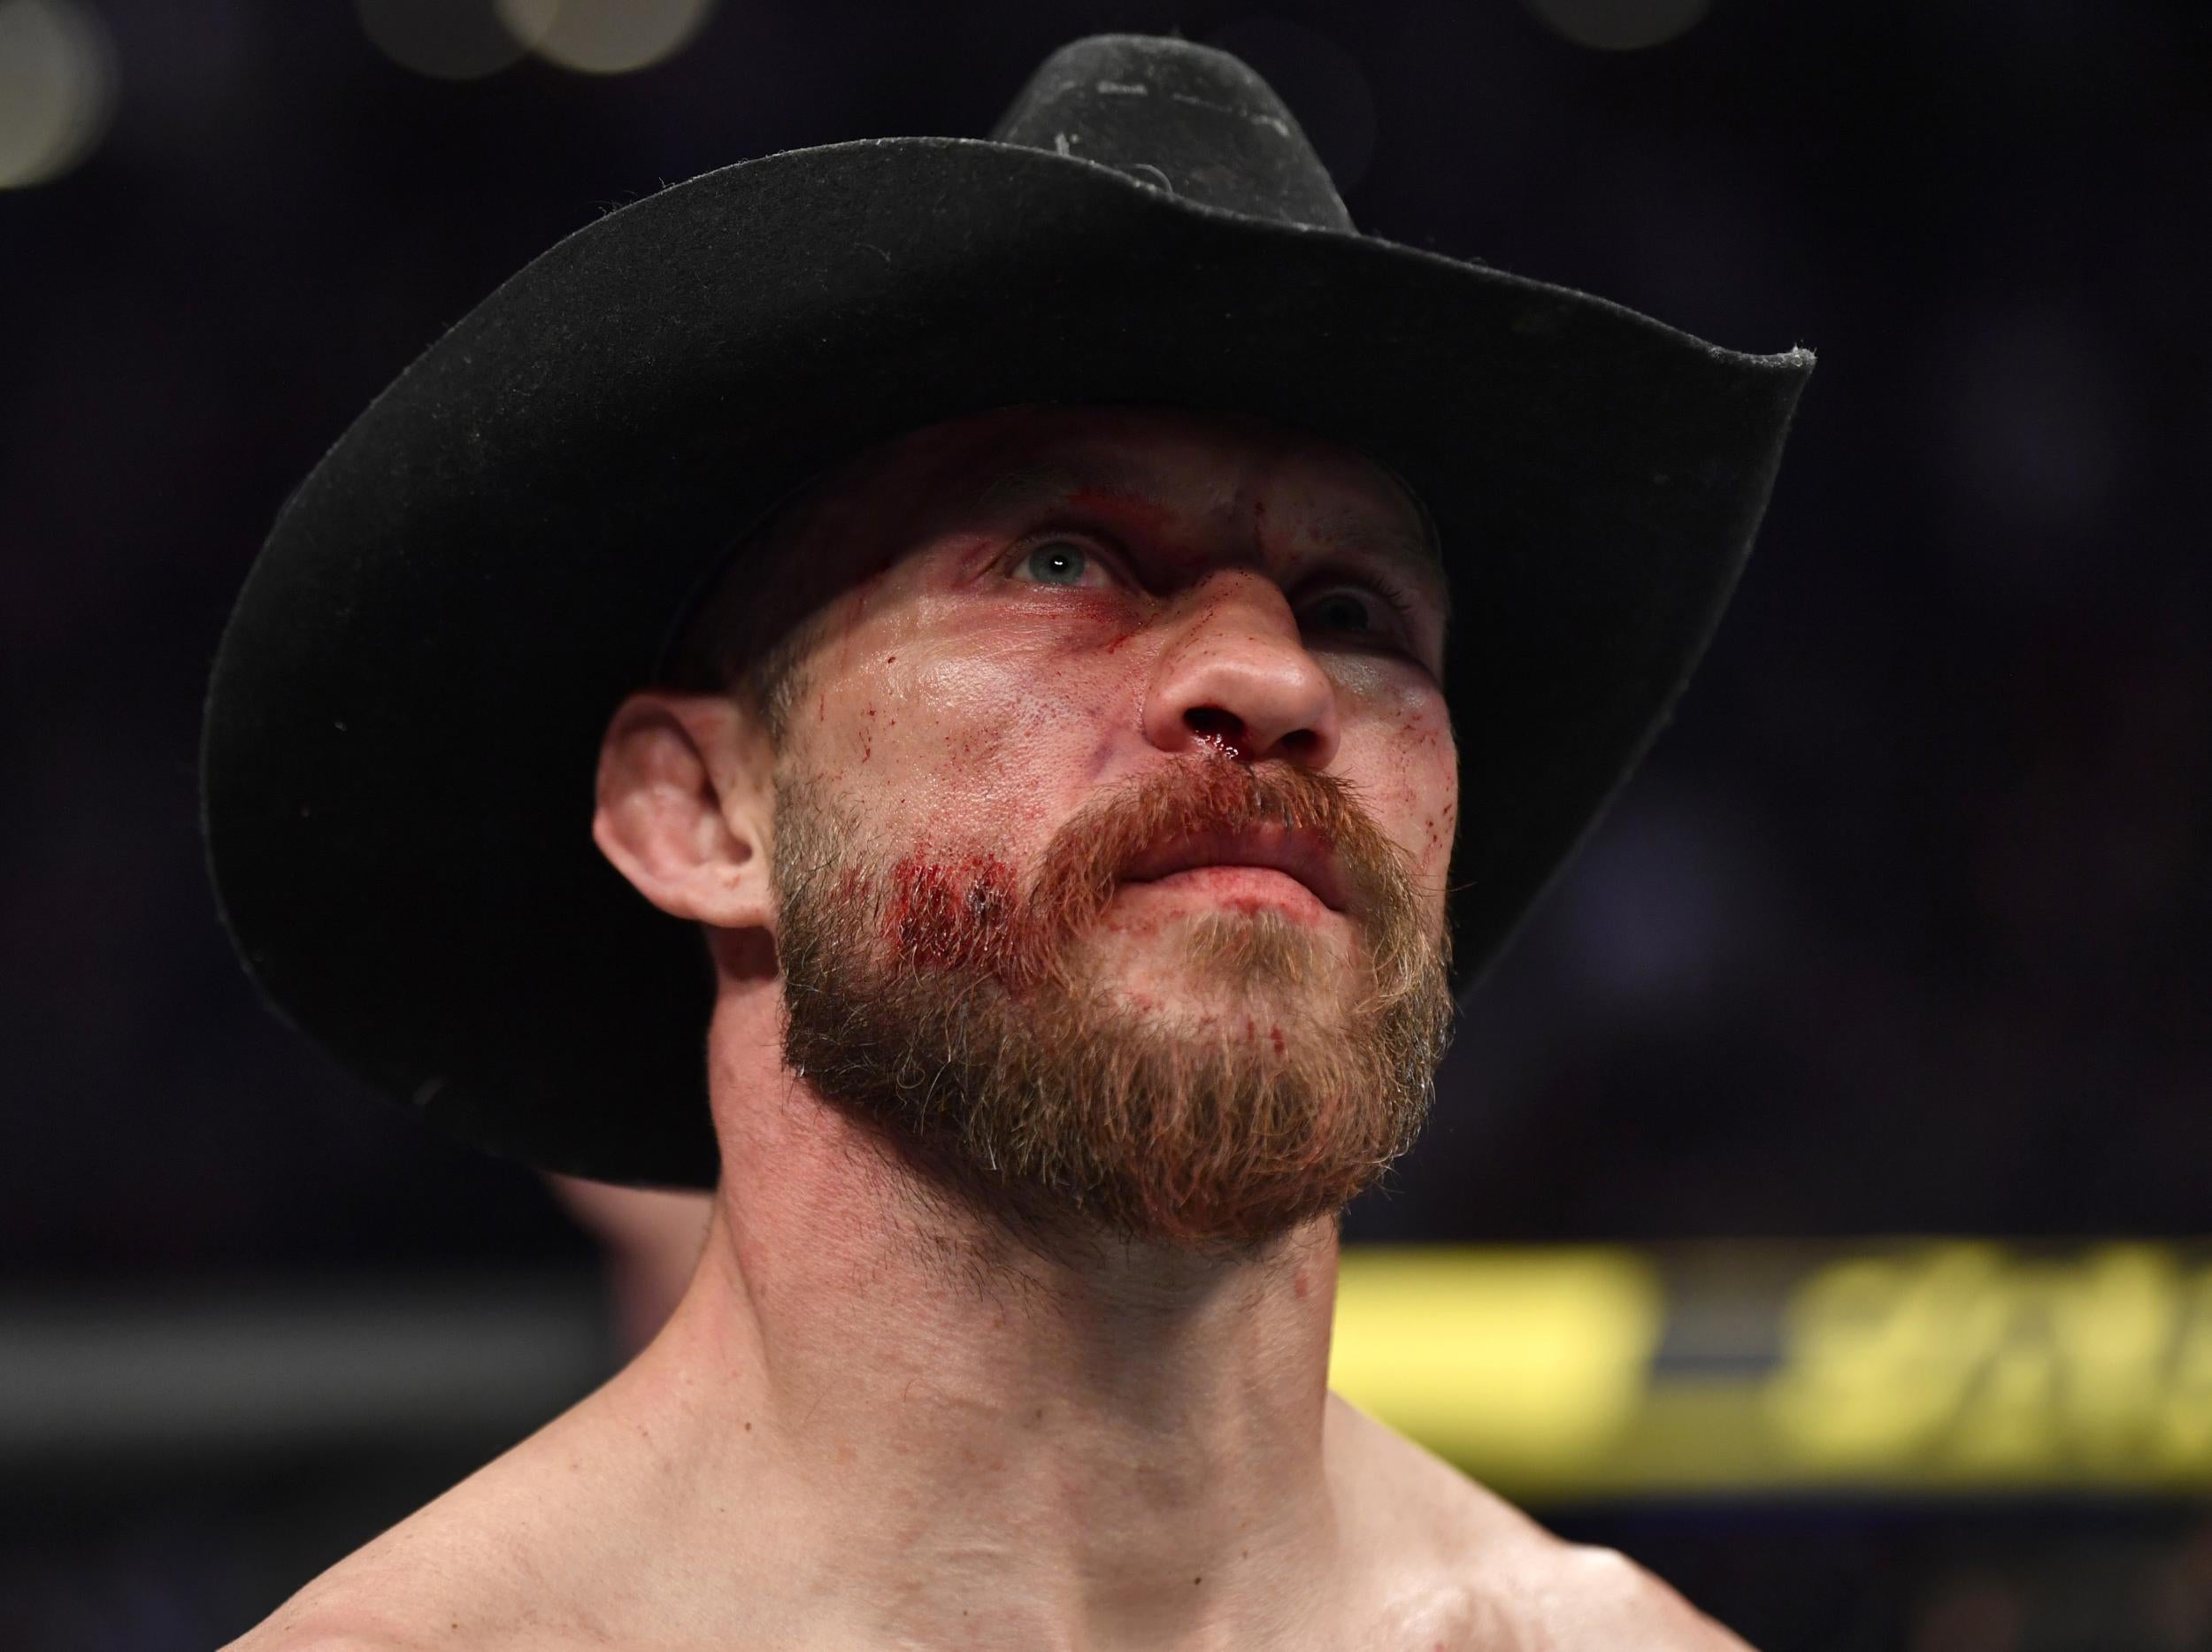 Donald Cerrone was taken to hospital after his defeat